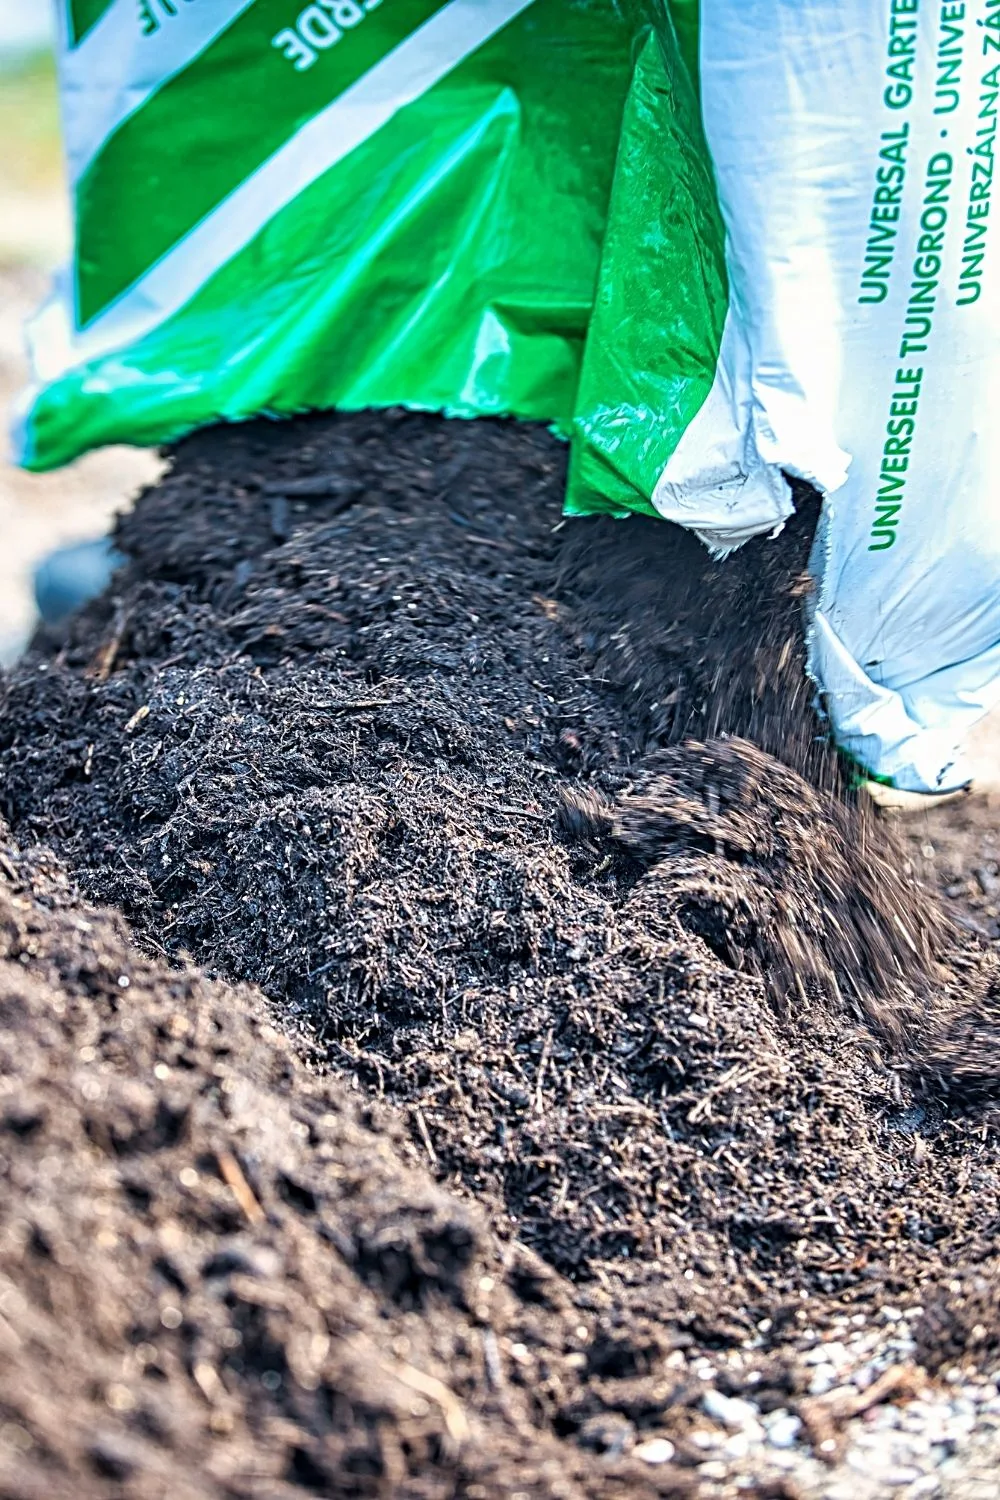 Mixing 50% compost with 50% topsoil is another way of preparing the soil for raised beds for vegetables